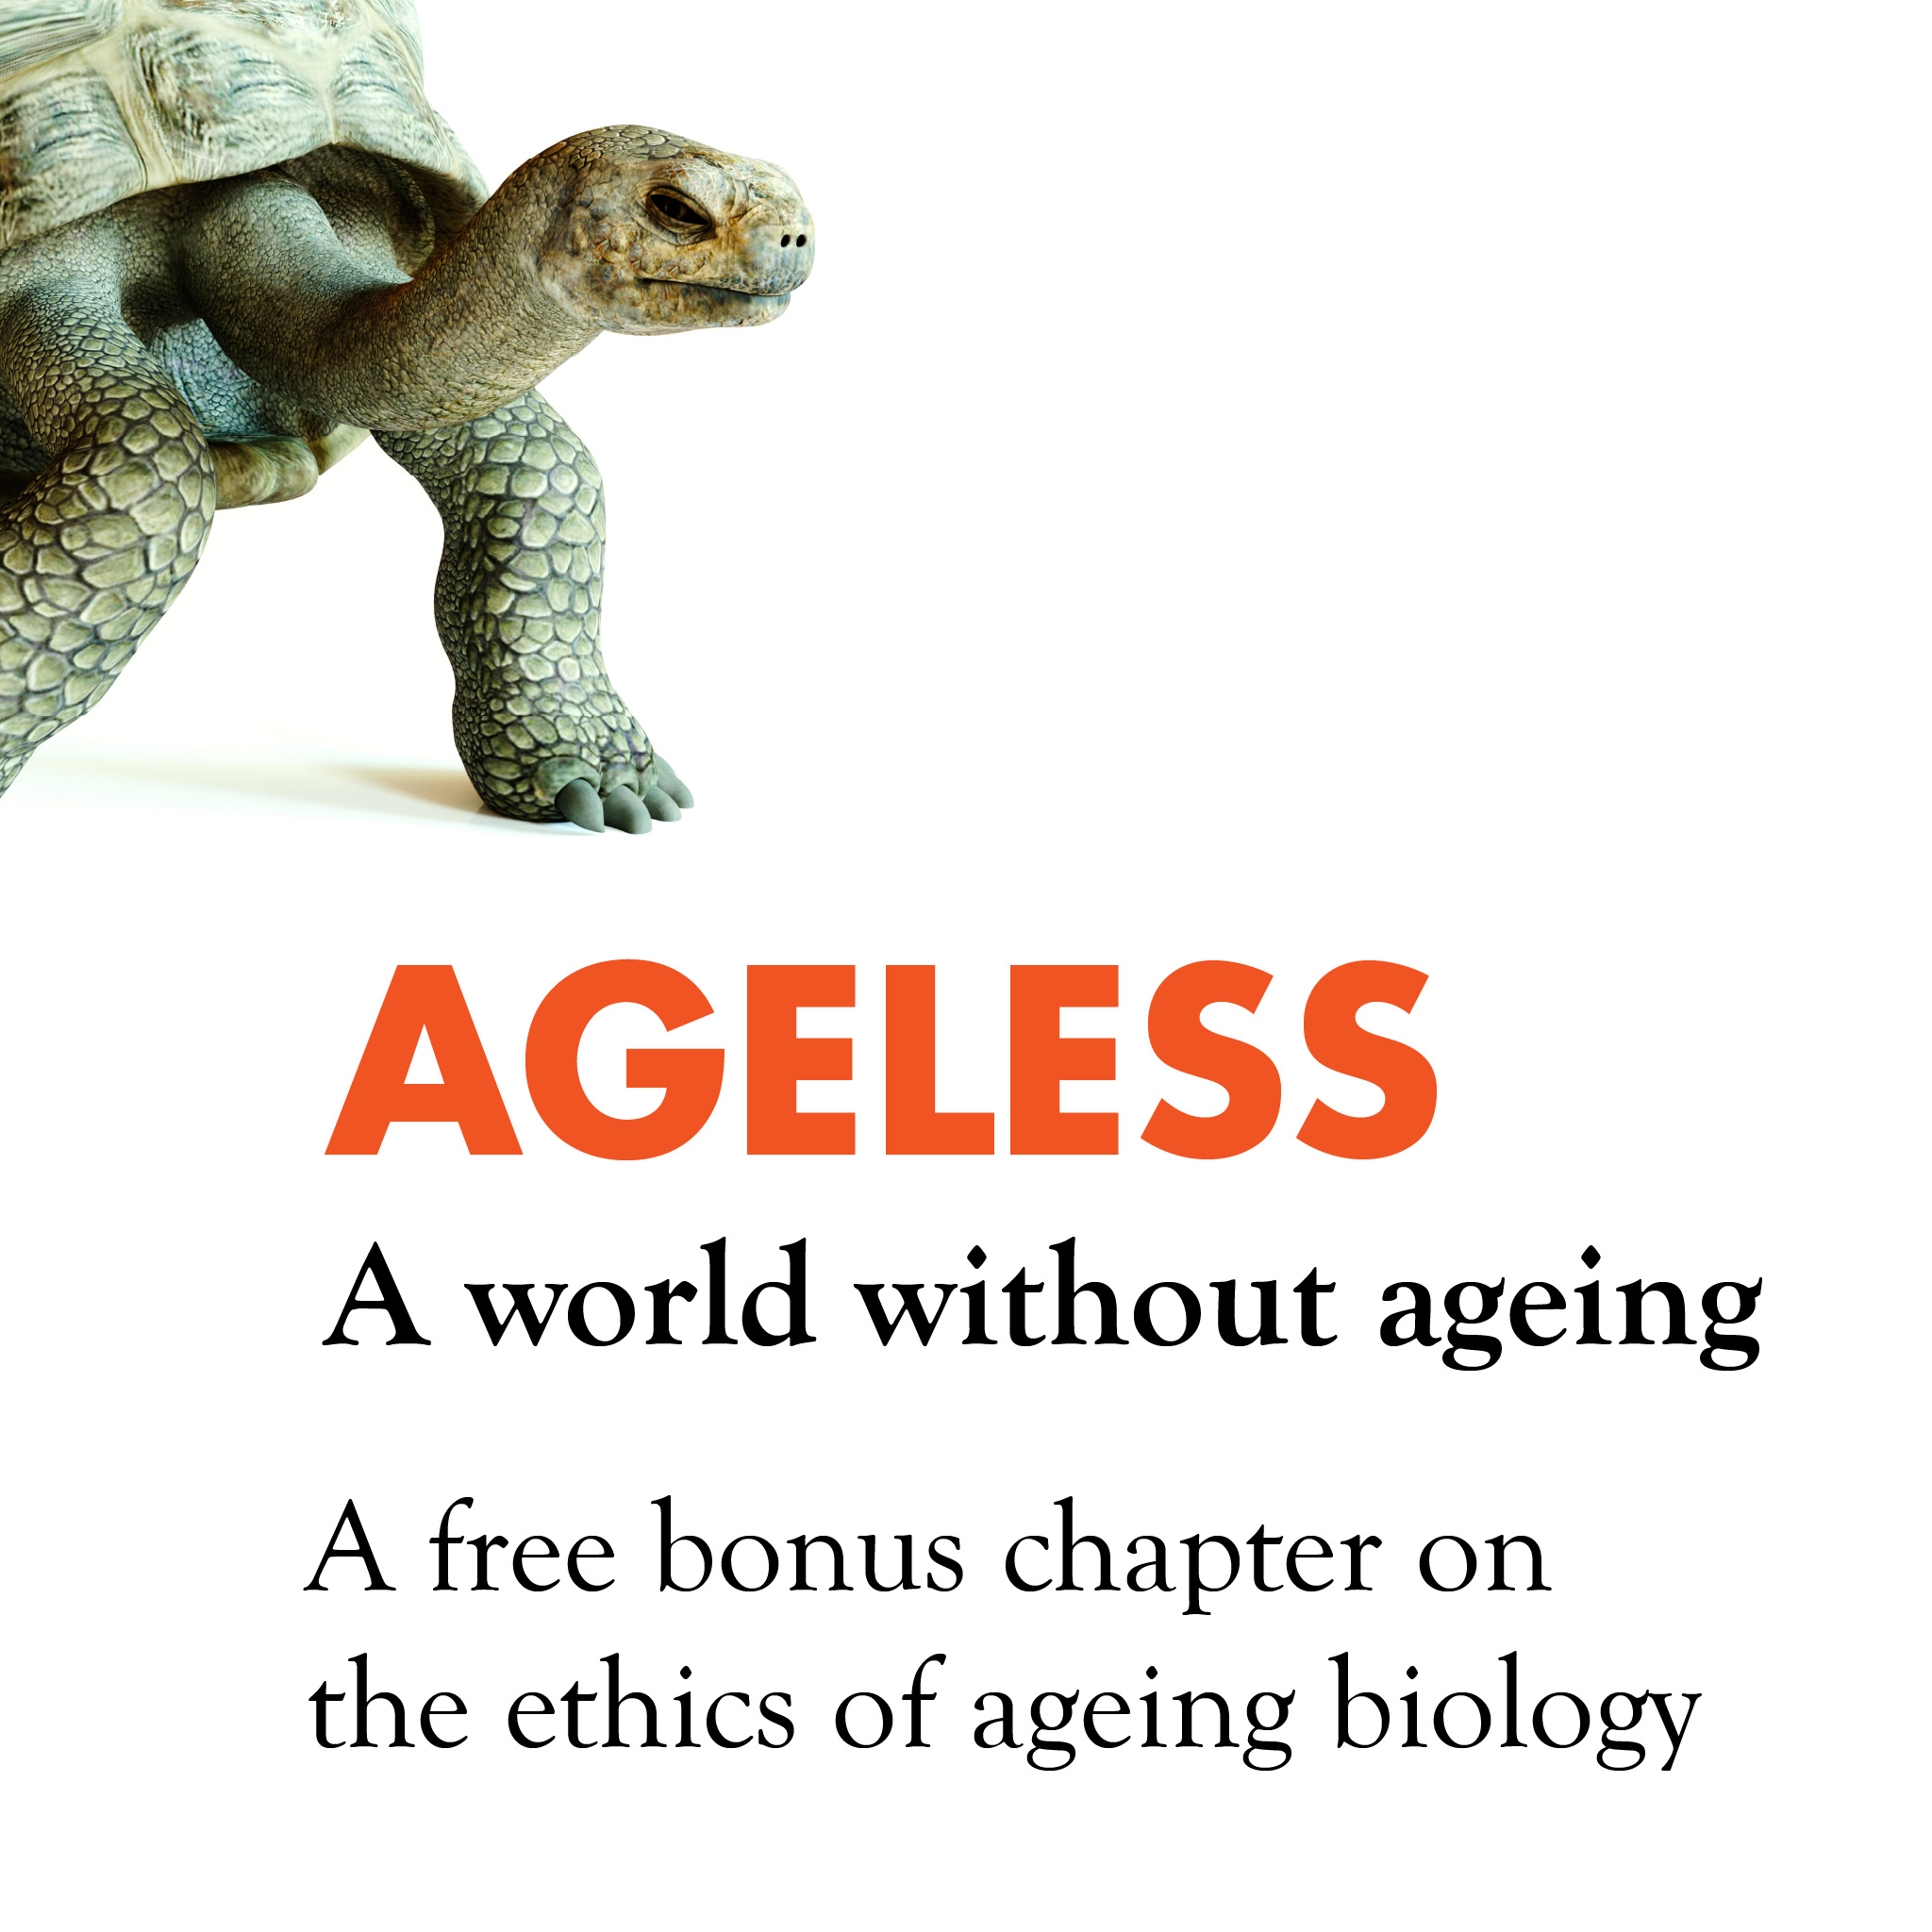 The ethics of ageing biology – Andrew Steele